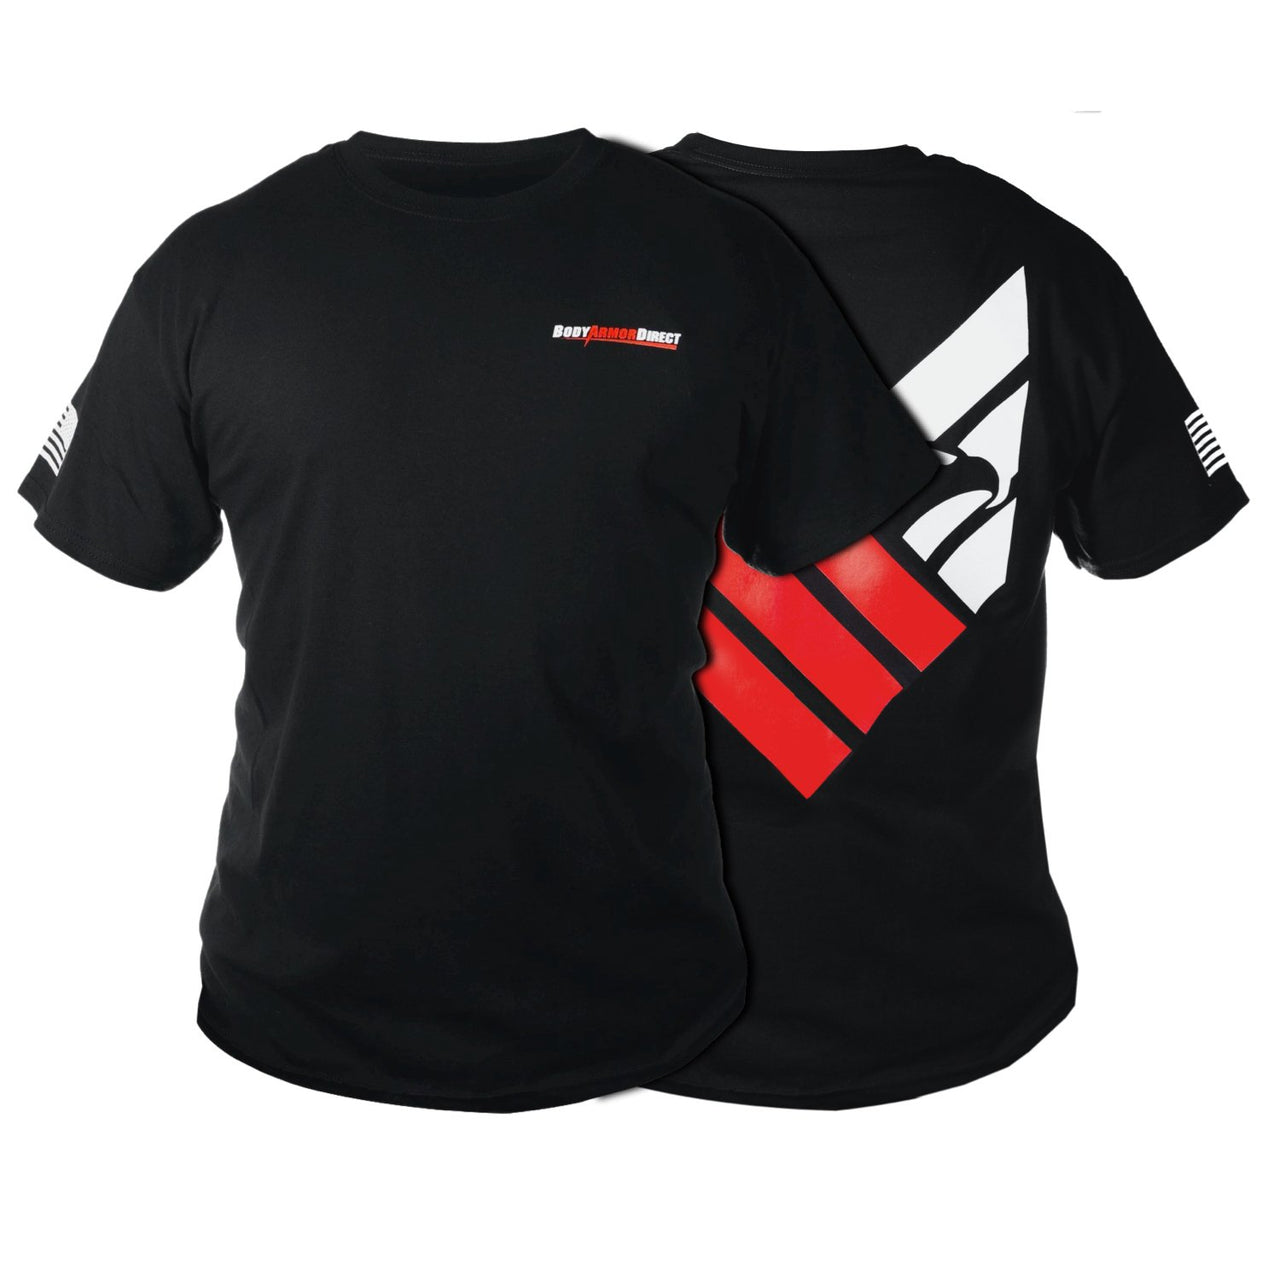 Two black Body Armor Direct T-Shirts; one plain and one with a large red and white abstract design on the side. Both have a small logo on the chest representing Body Armor Direct.